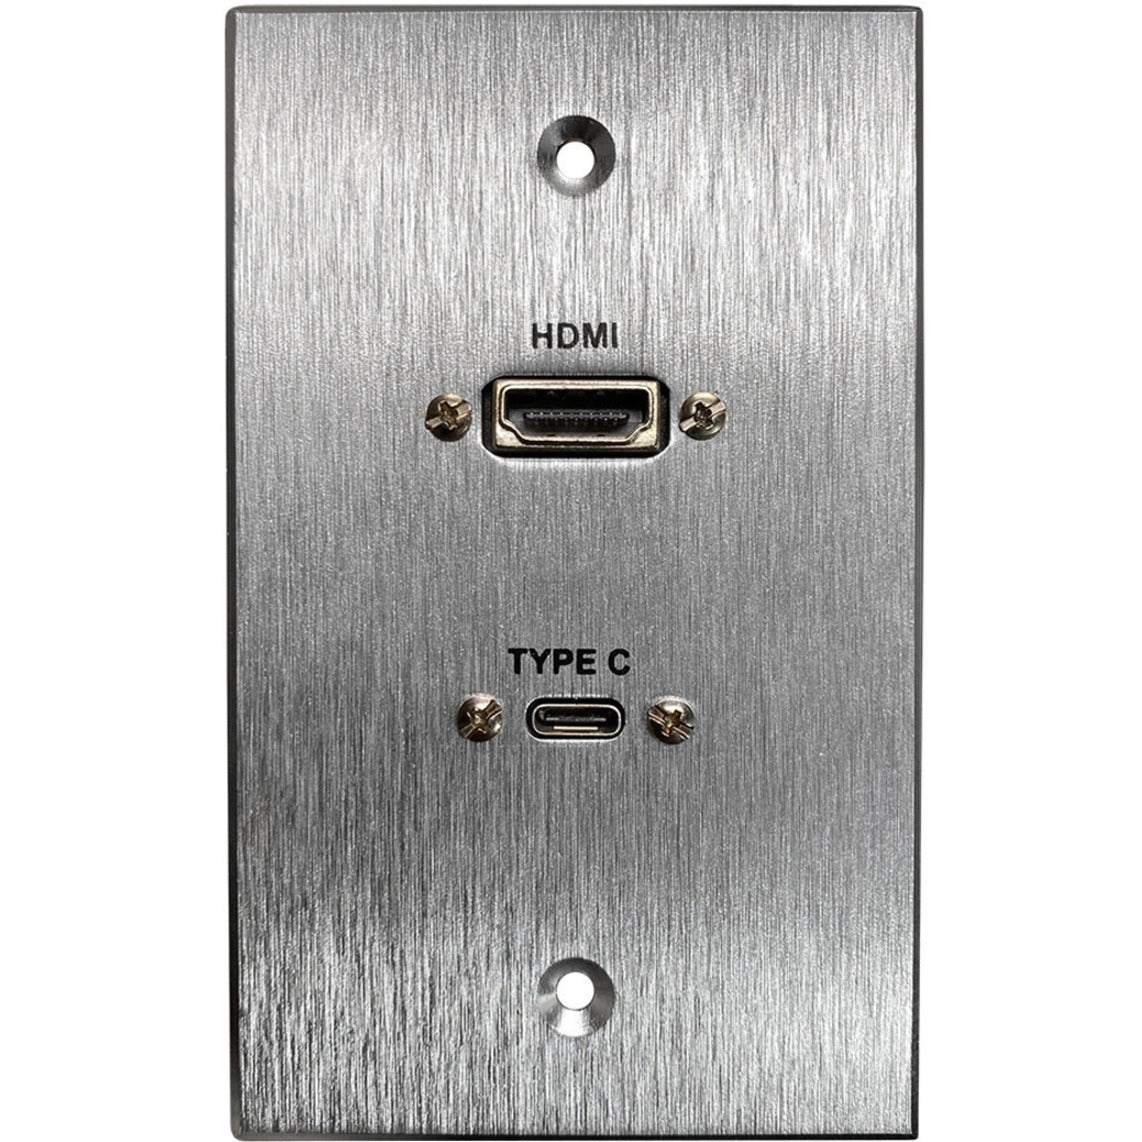 Comprehensive WPPT-HD-U3C-AC HDMI and USB-C 3.0 Pass-Through Single Gang Aluminum Wall Plate with Pigtail, Office, Classroom, Hotel, Houses of Worship, Meeting